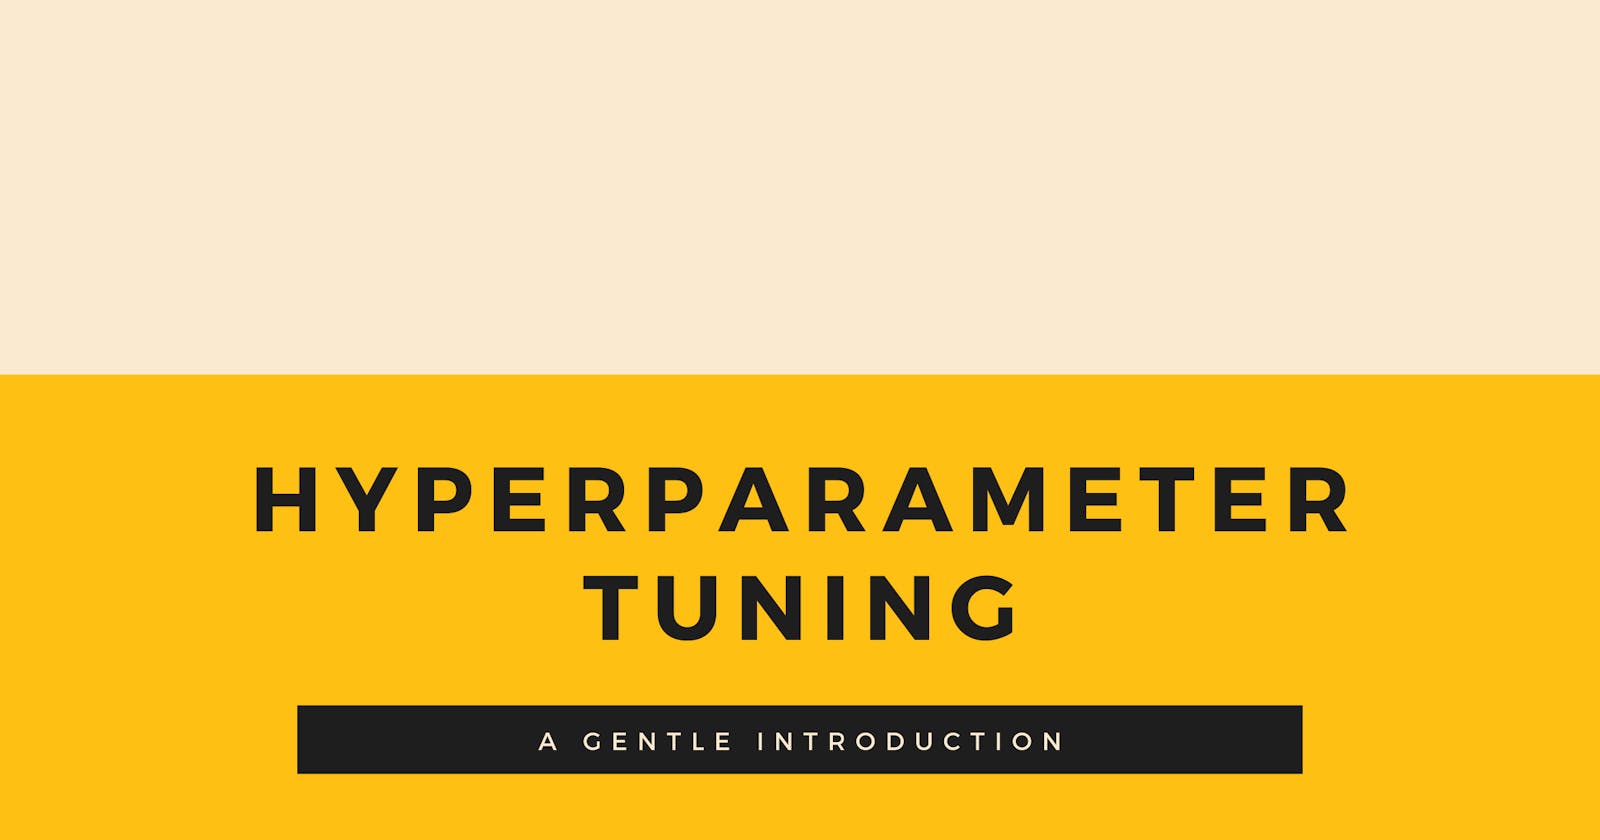 Intro to Hyperparameter tuning with Wine classification dataset.